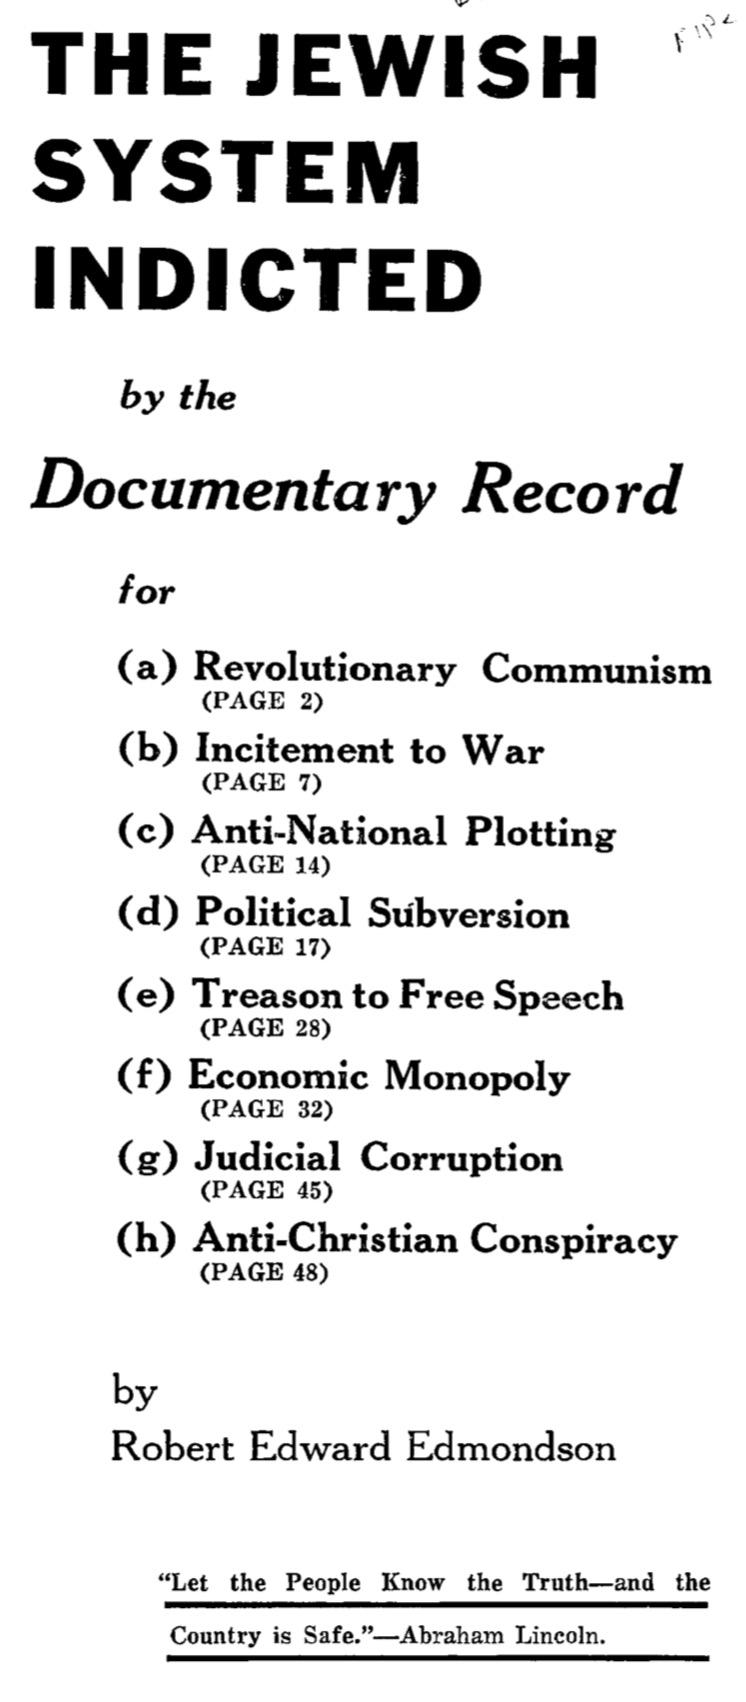 The Jewish system indicted by the documentary record (1937) by Robert Edward Edmondson